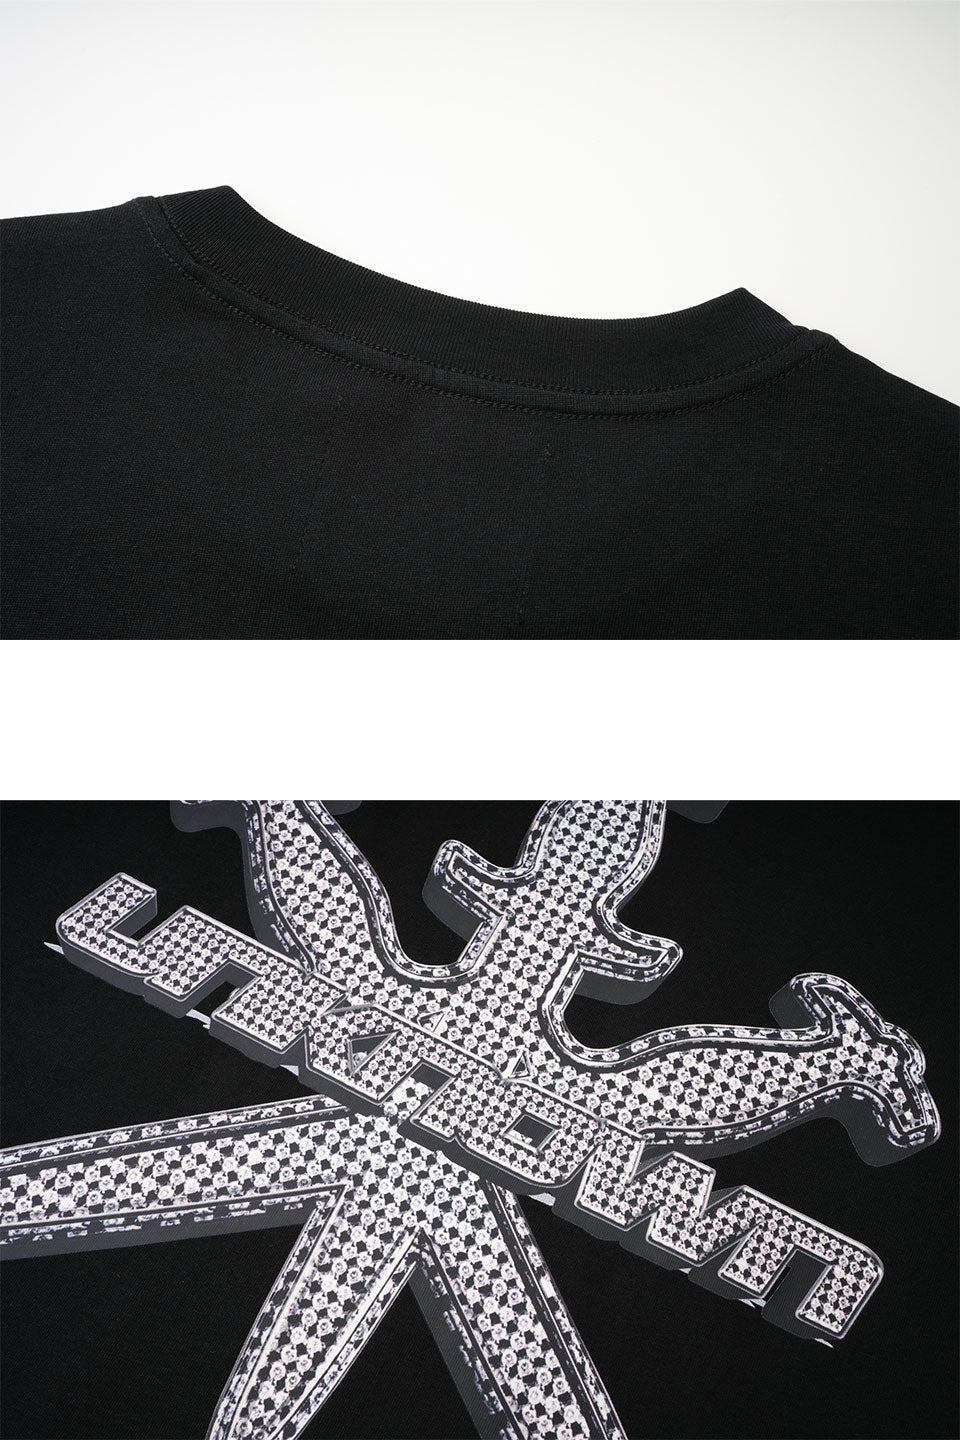 Iced Out Style Dagger Tee